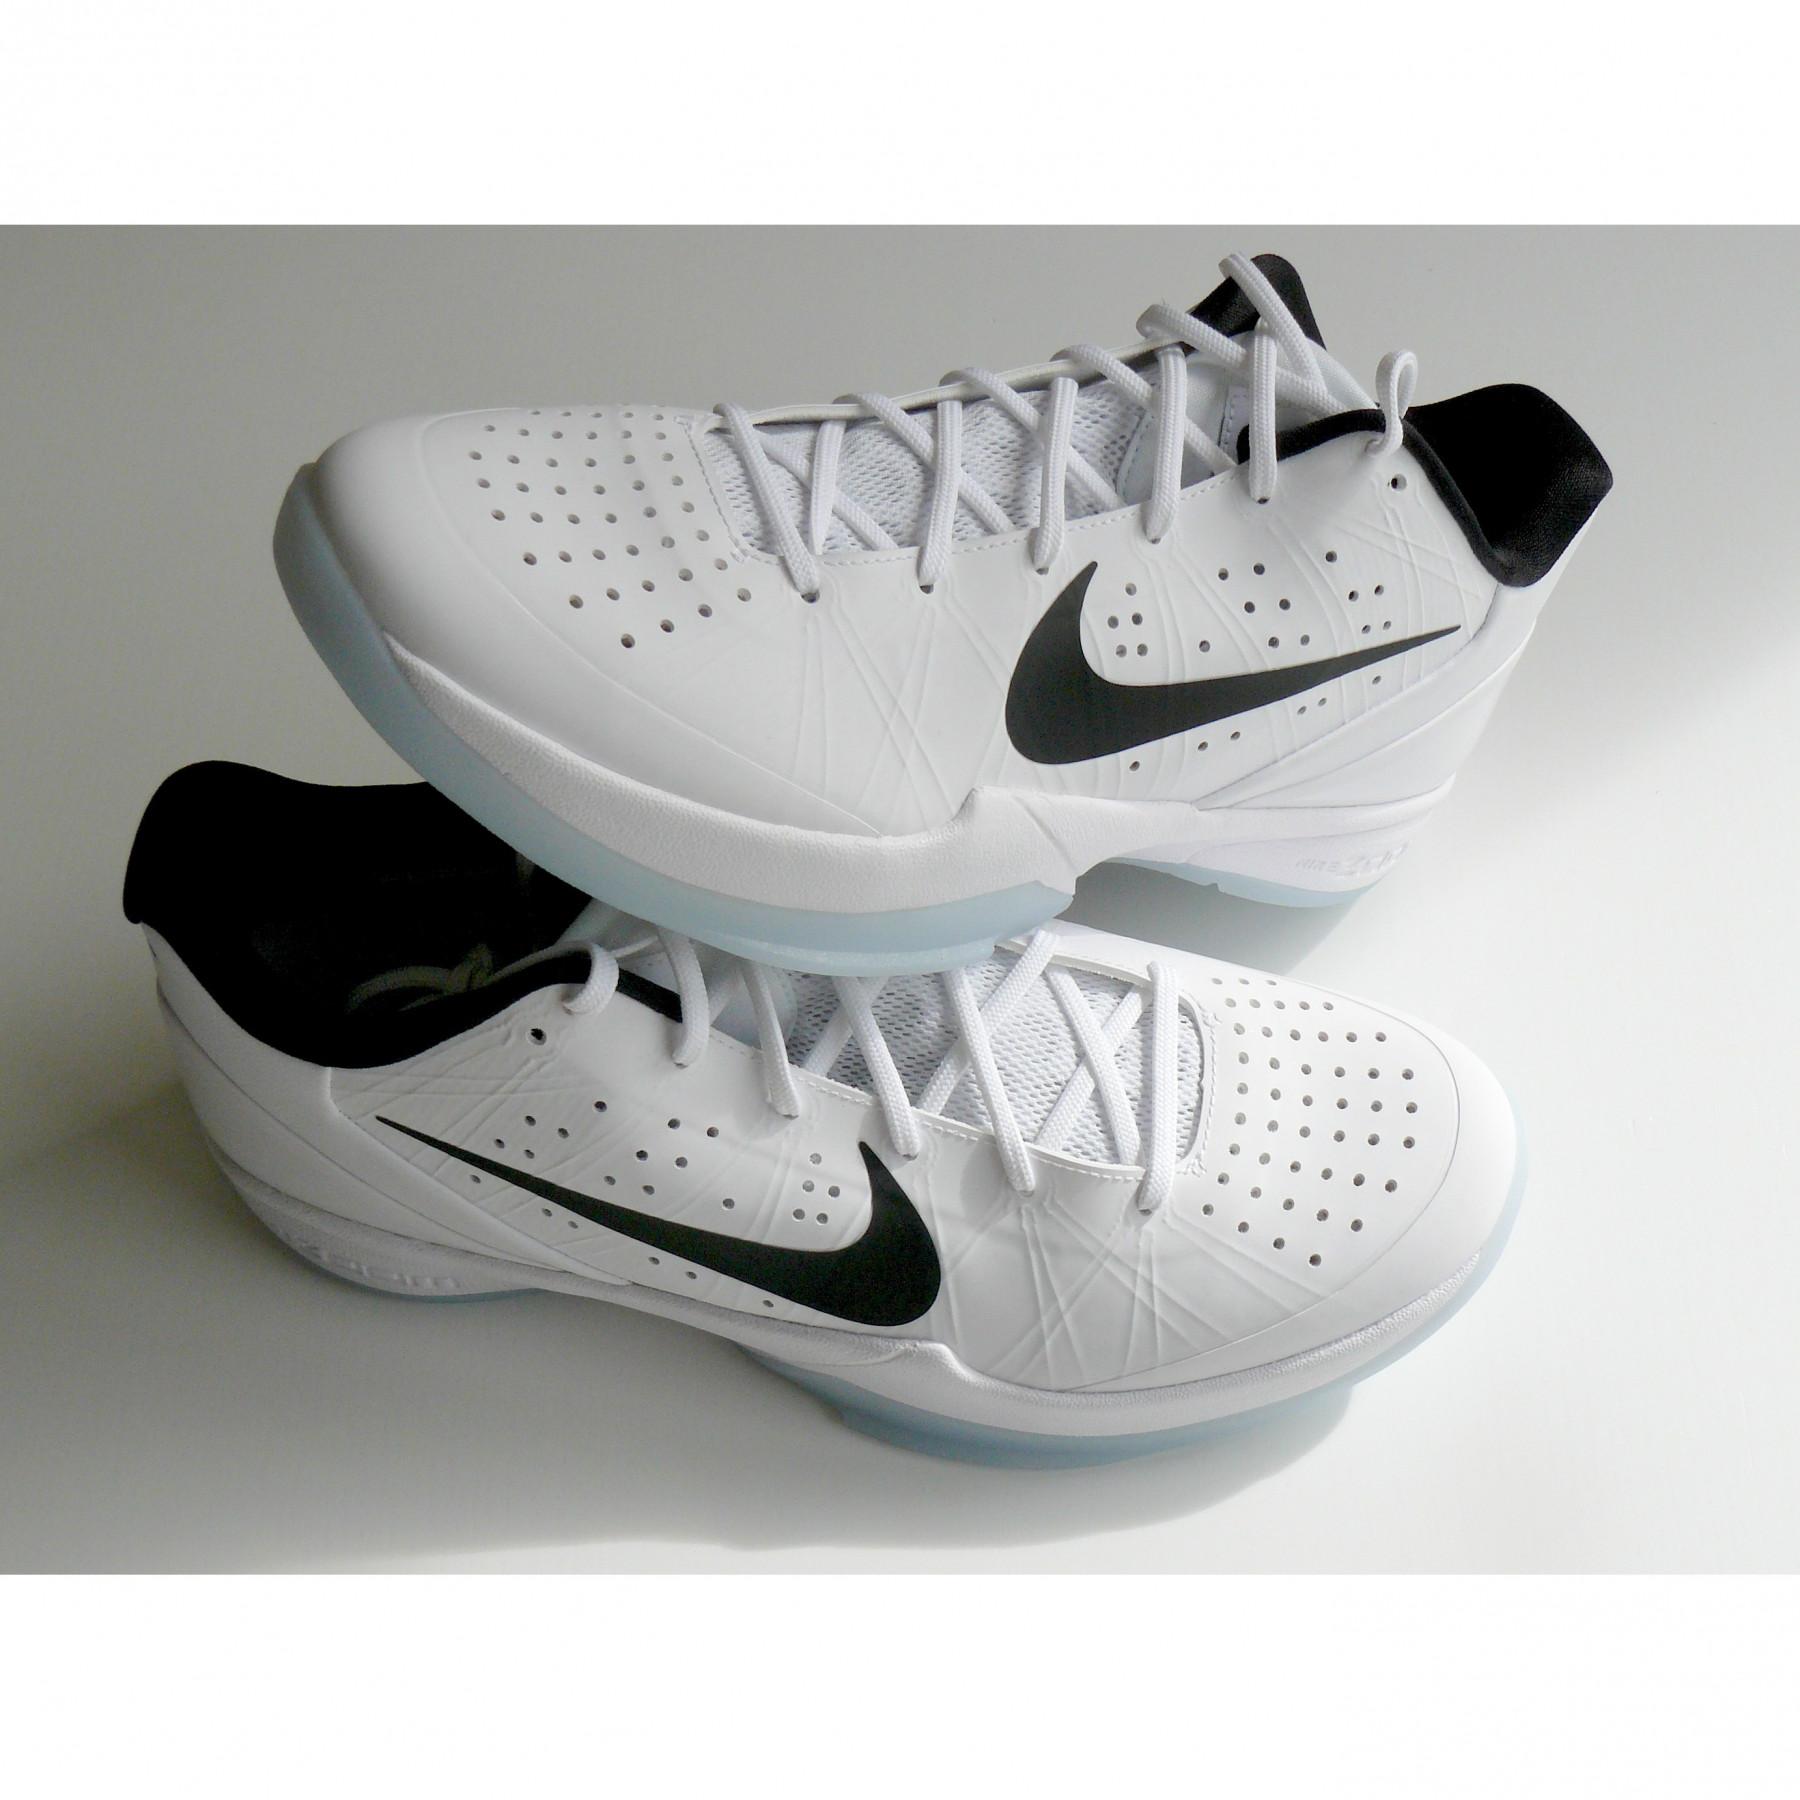 Shoes Nike Air Zoom HyperAttack blanc